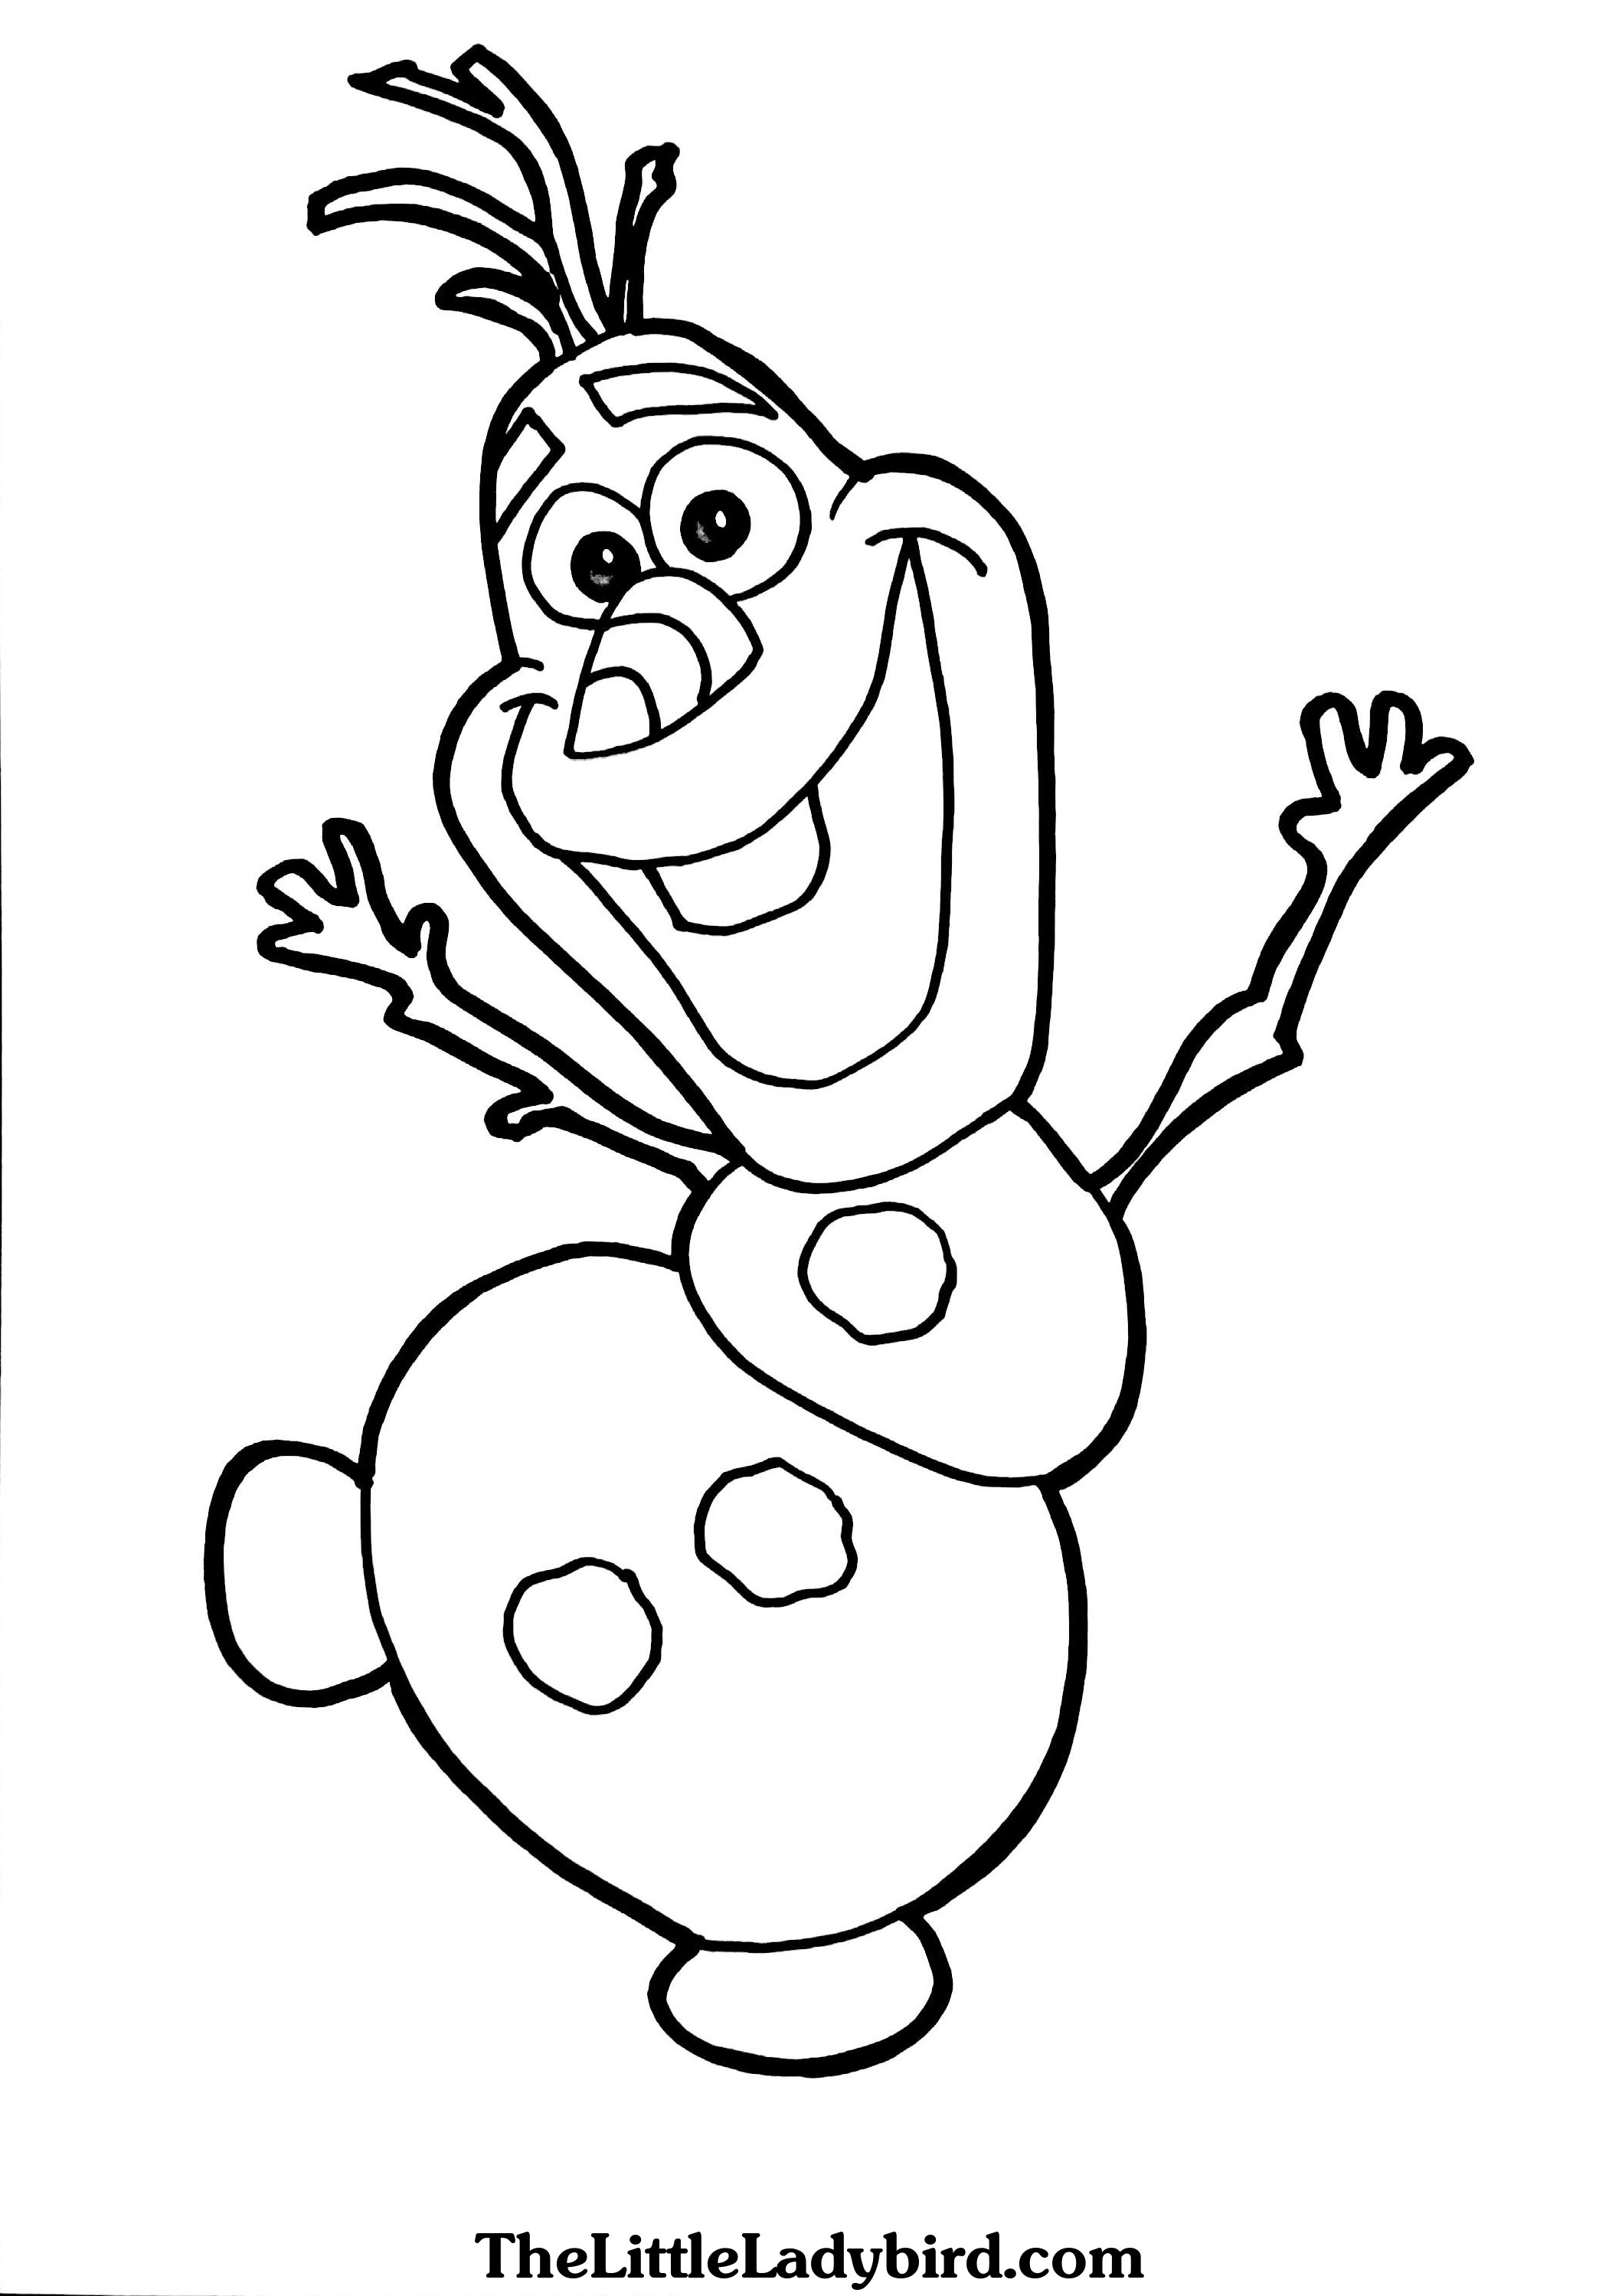 Frozen Olaf Coloring Pages at GetDrawings | Free download